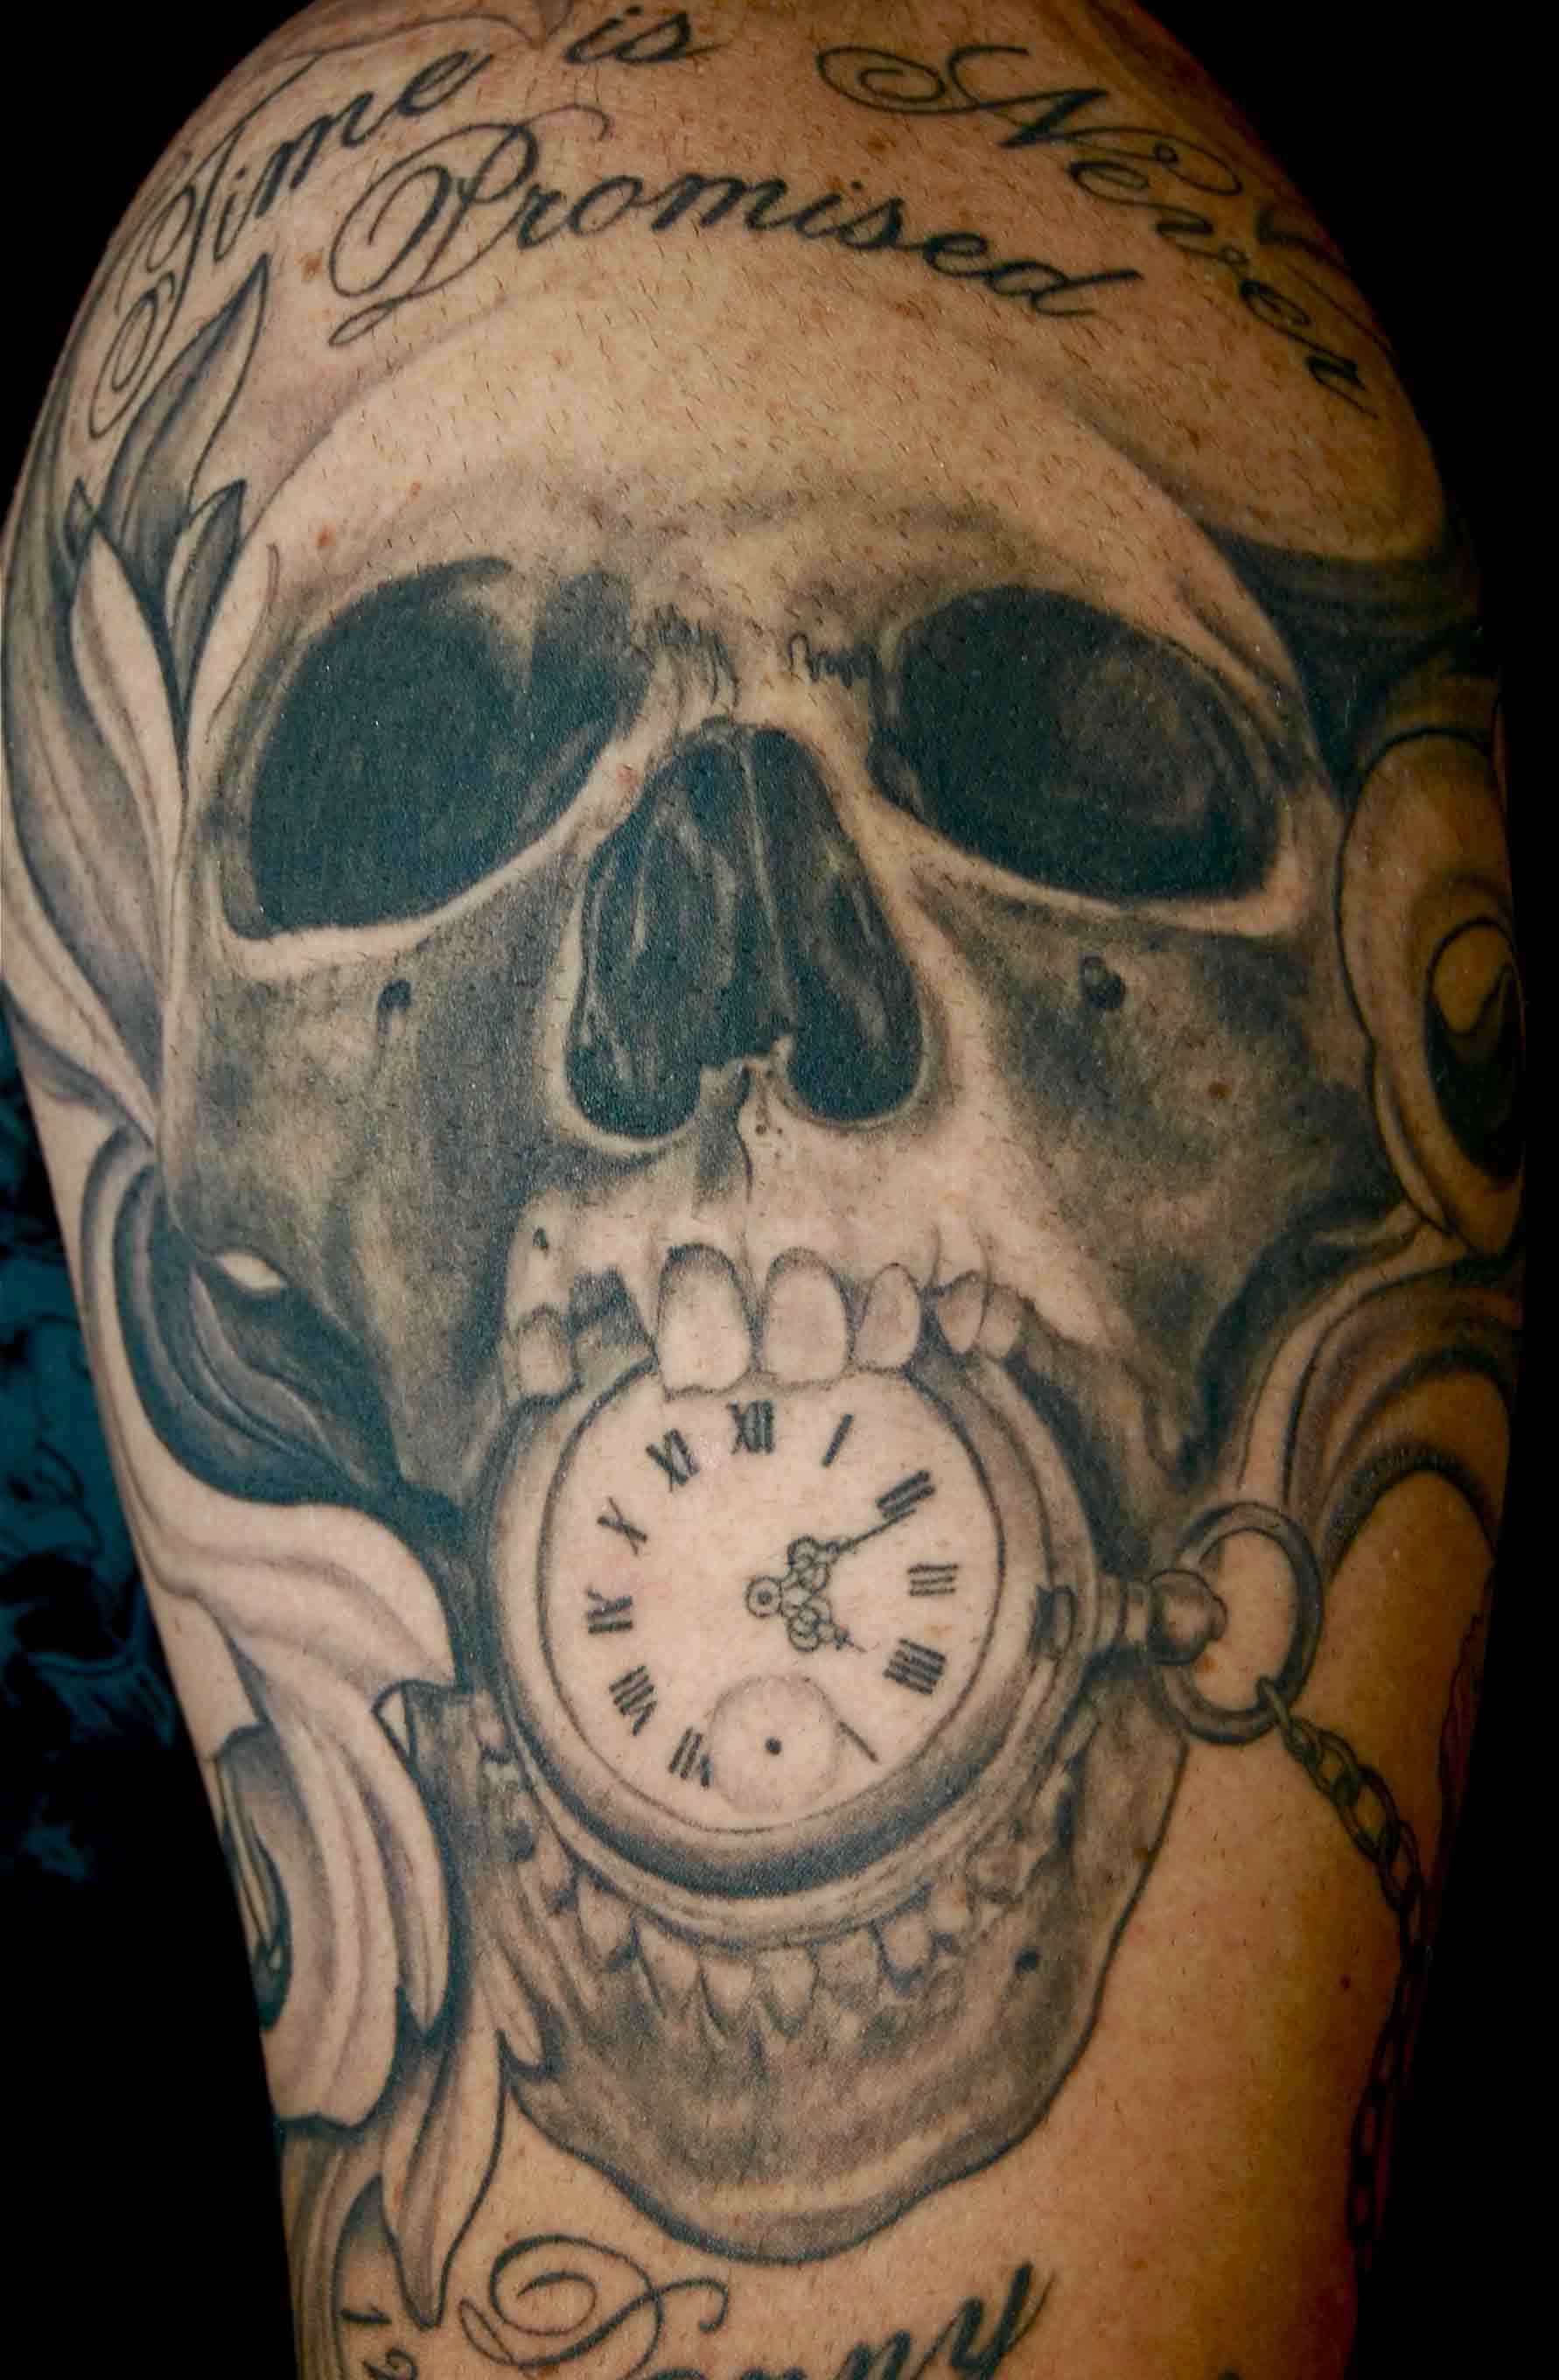 Black And Grey Pocket Watch In Skull Mouth Tattoo Design For Shoulder